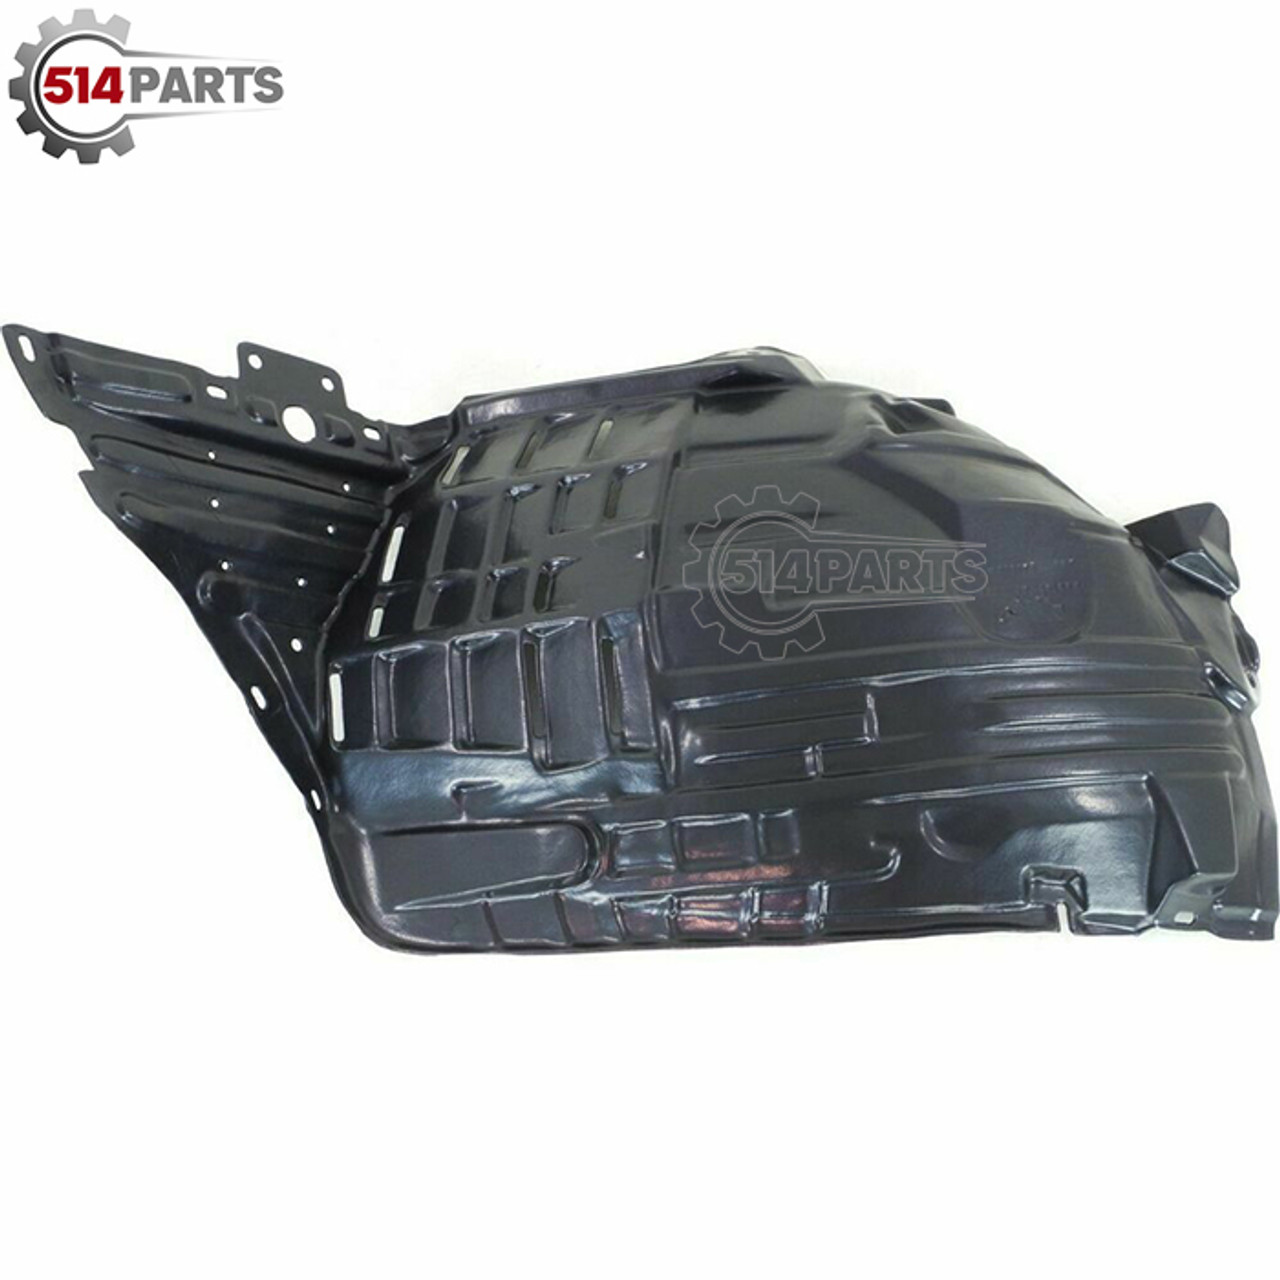 2006 - 2009 NISSAN 350Z FENDER LINER FRONT SECTION - FAUSSE AILE SECTION AVANT